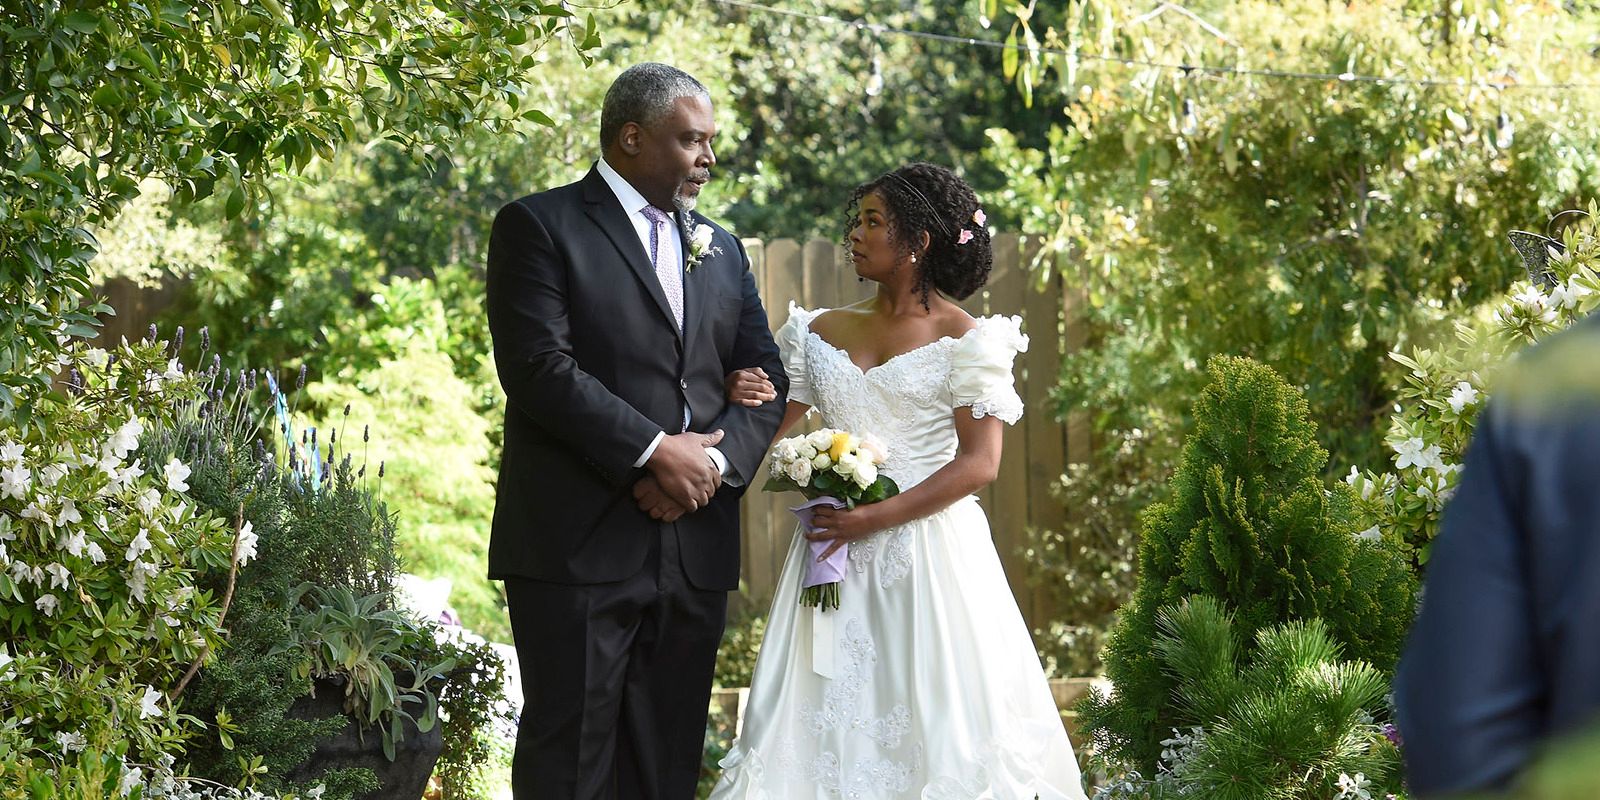 Simone and her father walking down the aisle on her wedding day in the Grey's Anatomy season 19 finale